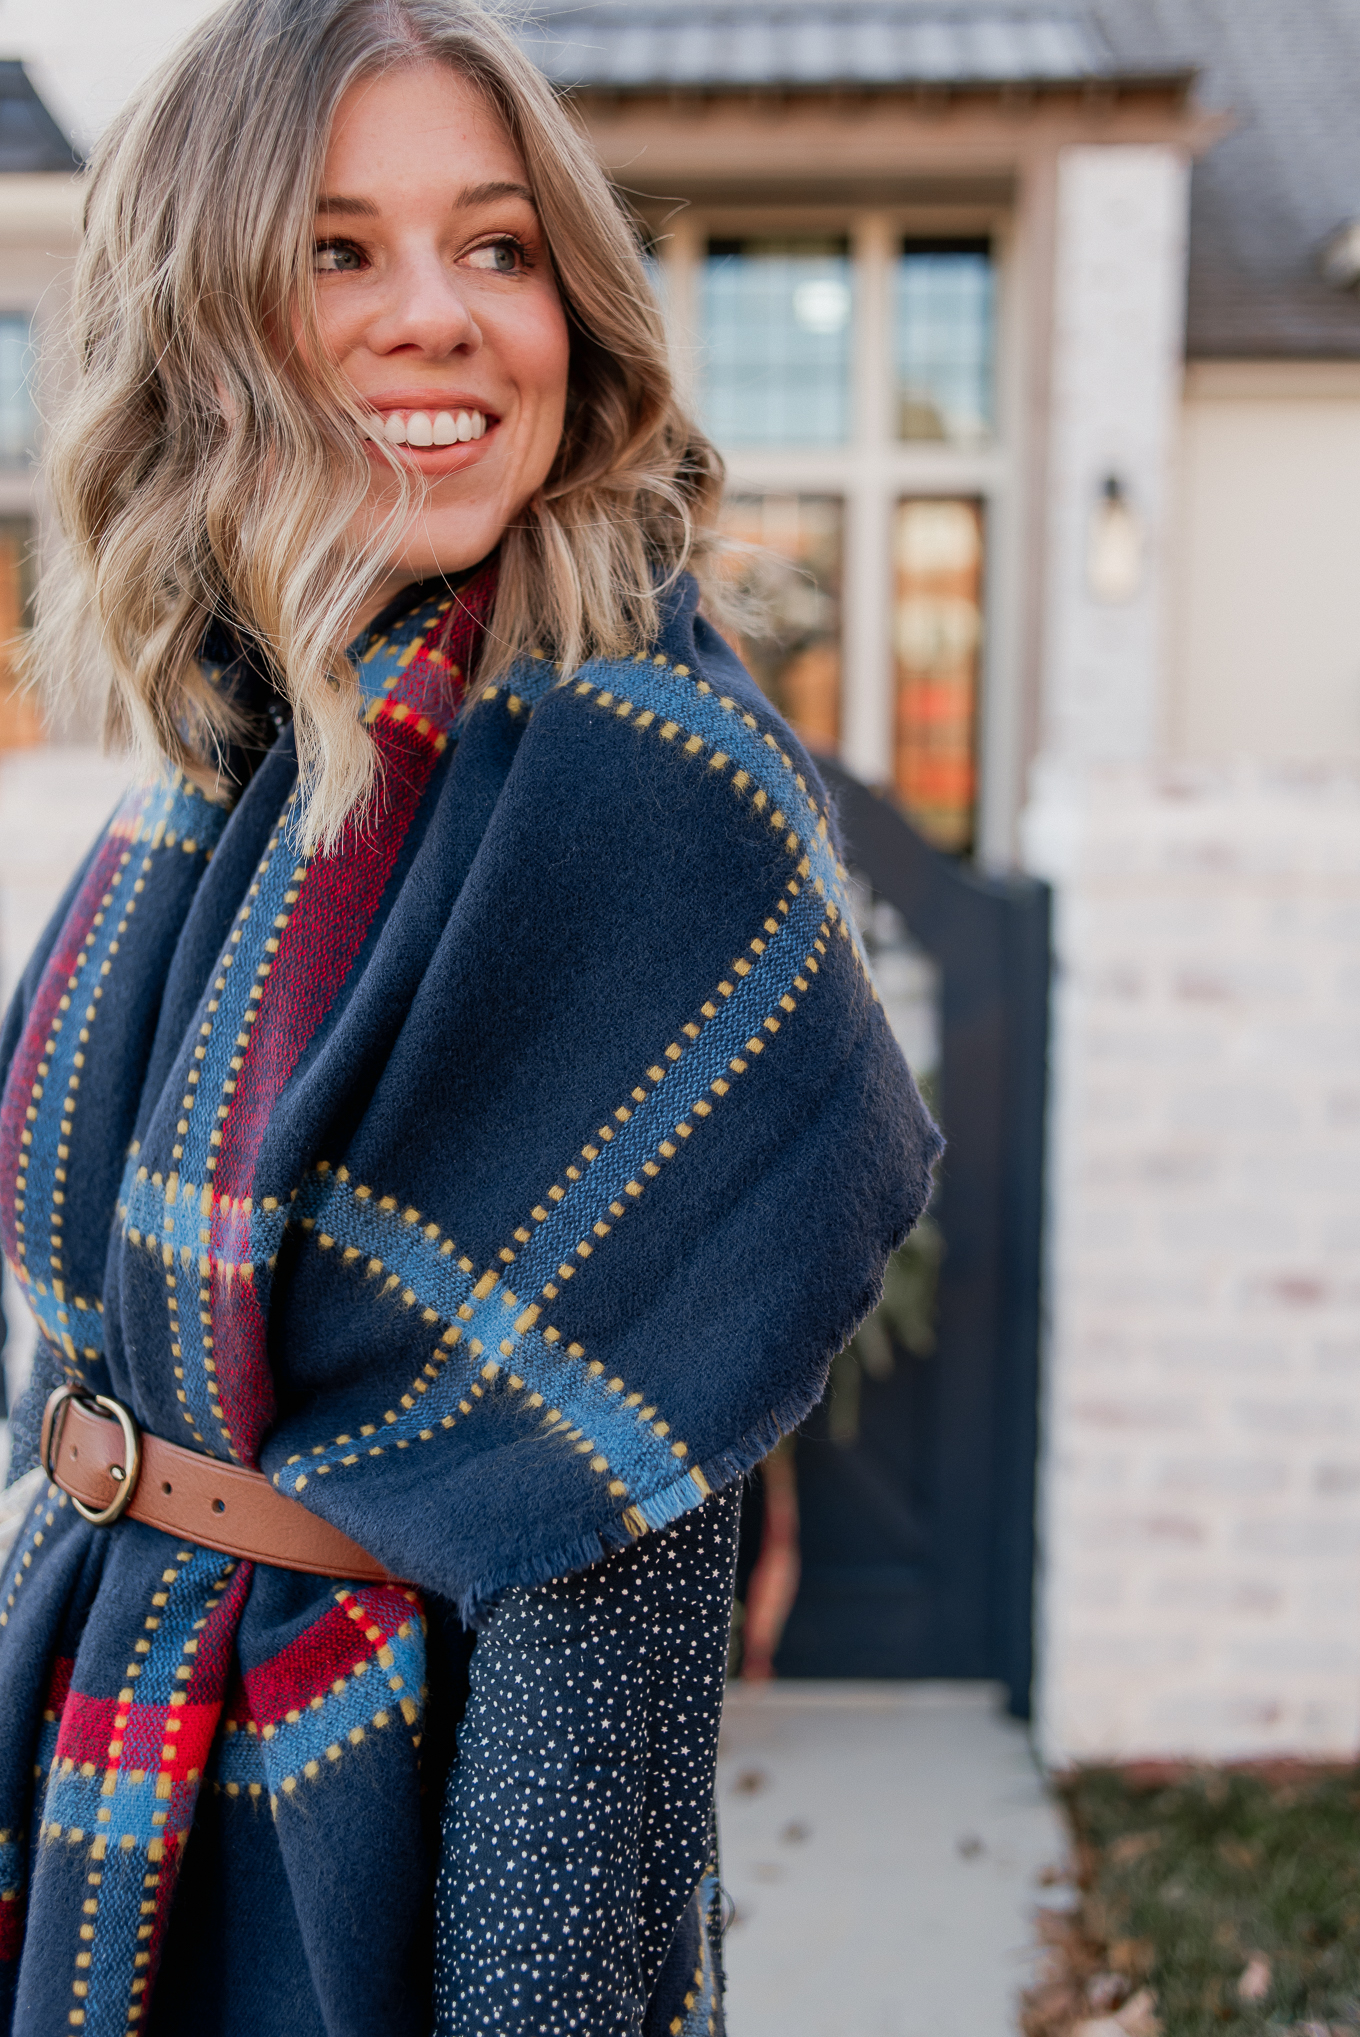 Laura Leigh of Louella Reese shares how to style a scarf as vest this winter season #styletip #scarfvest #winterstyle